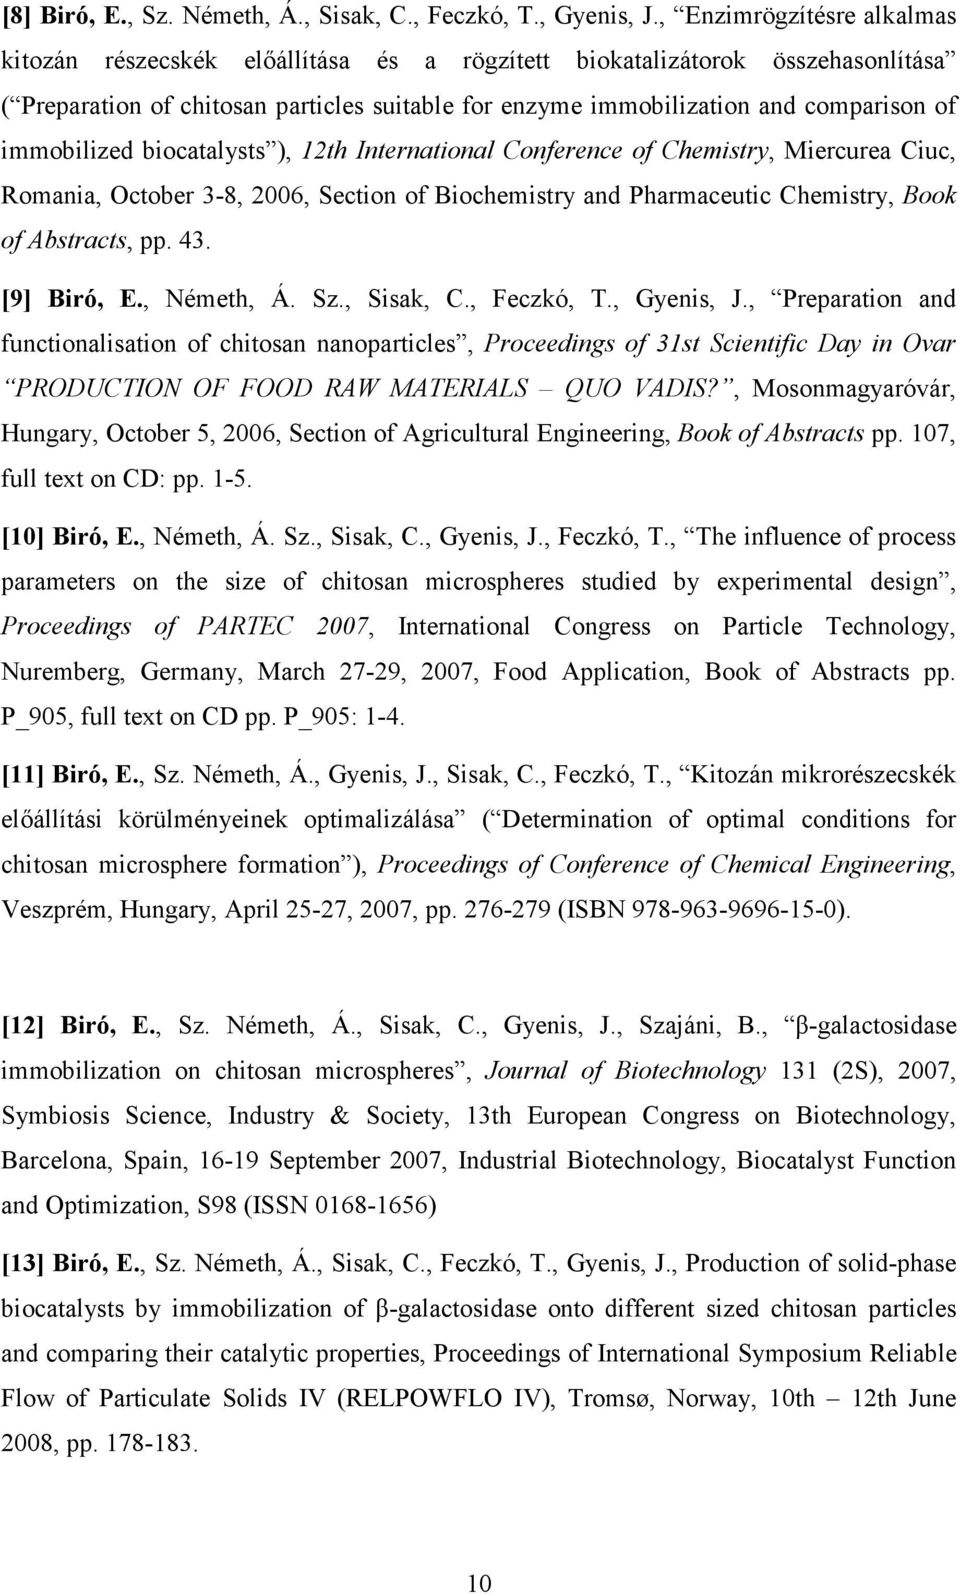 immobilized biocatalysts ), 12th International Conference of Chemistry, Miercurea Ciuc, Romania, October 3-8, 2006, Section of Biochemistry and Pharmaceutic Chemistry, Book of Abstracts, pp. 43.